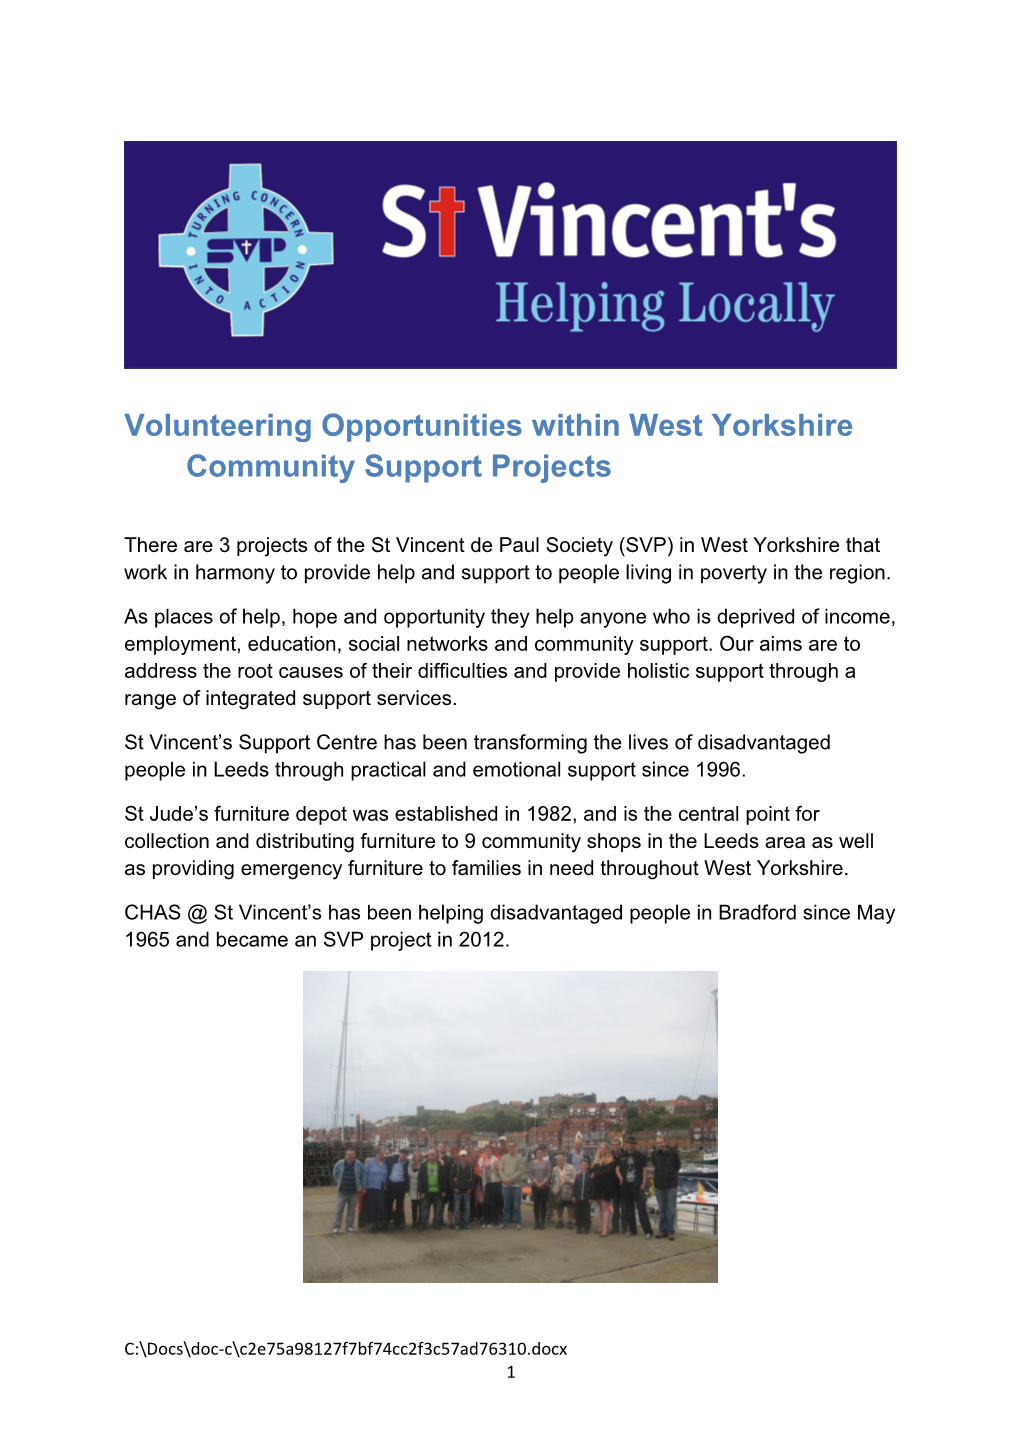 Volunteering Opportunities Within West Yorkshire Community Support Projects